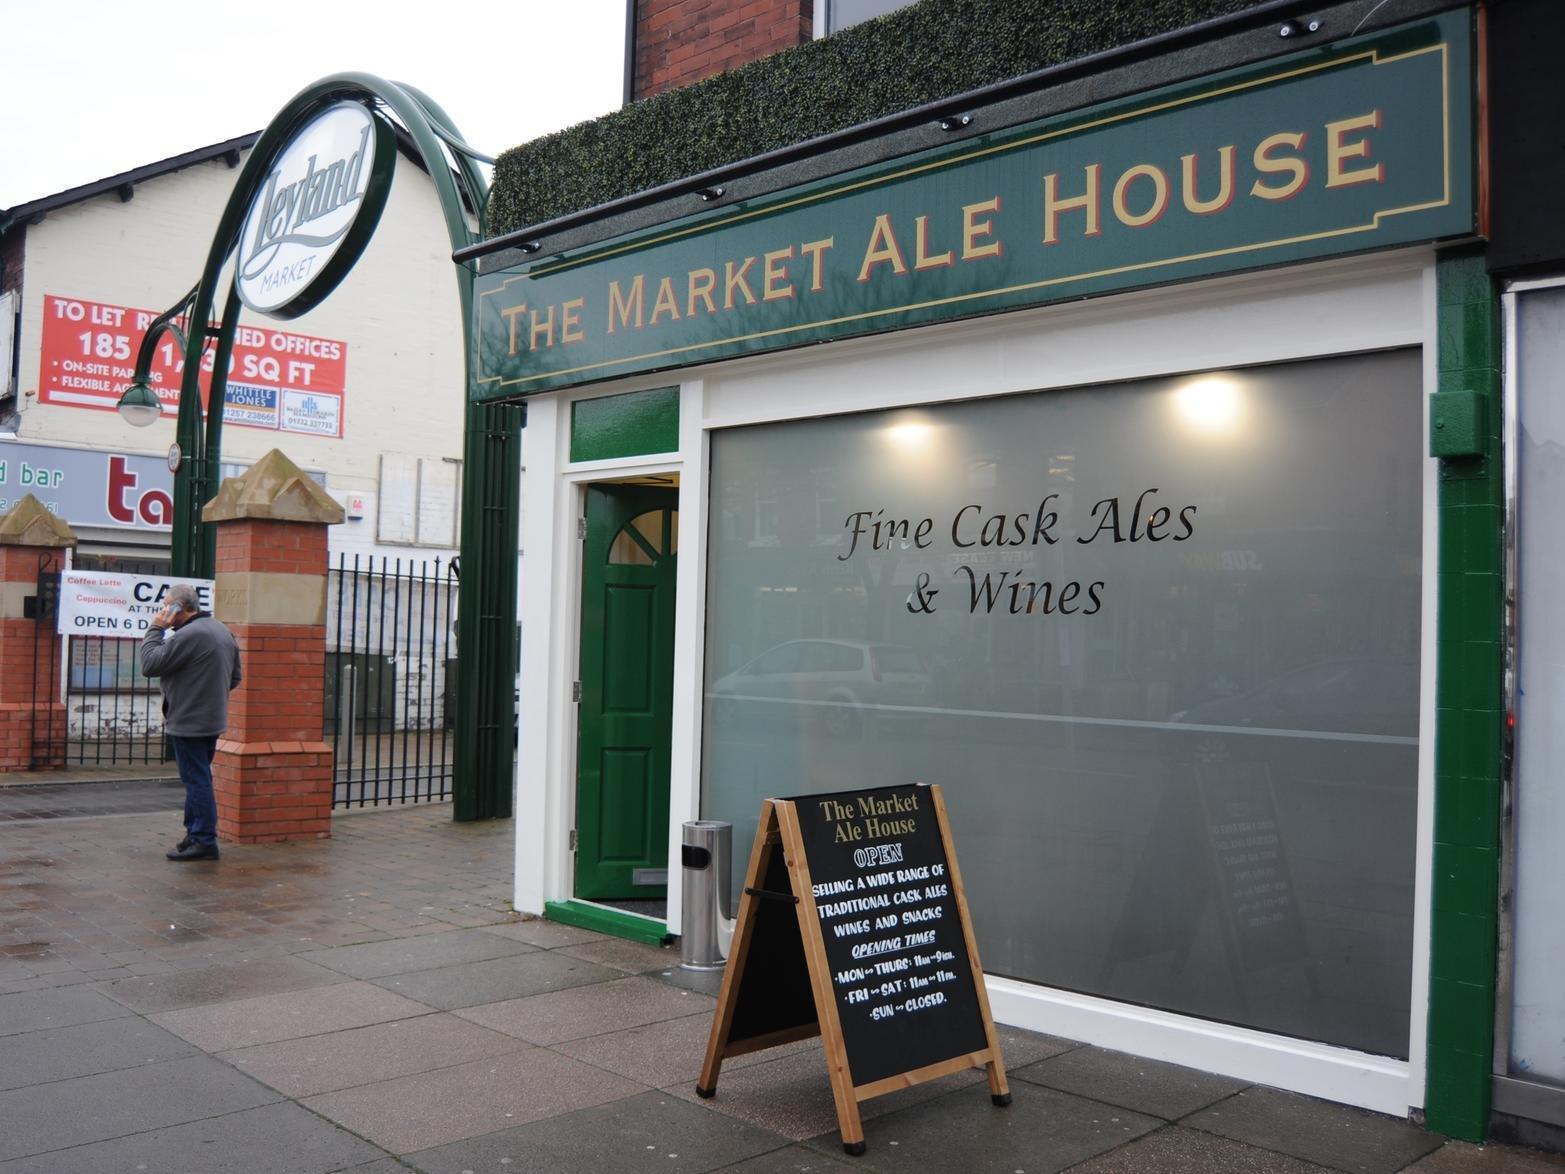 The small venue was Leylands first micropub, opened in 2013.
As well as selling a selection of cask ales, it has a constant rotation of craft bottle beers, ciders, gins, malt whiskies and wines. Market Ale House was awarded Cider Pub of the Year 2016 in its local CAMRA area.